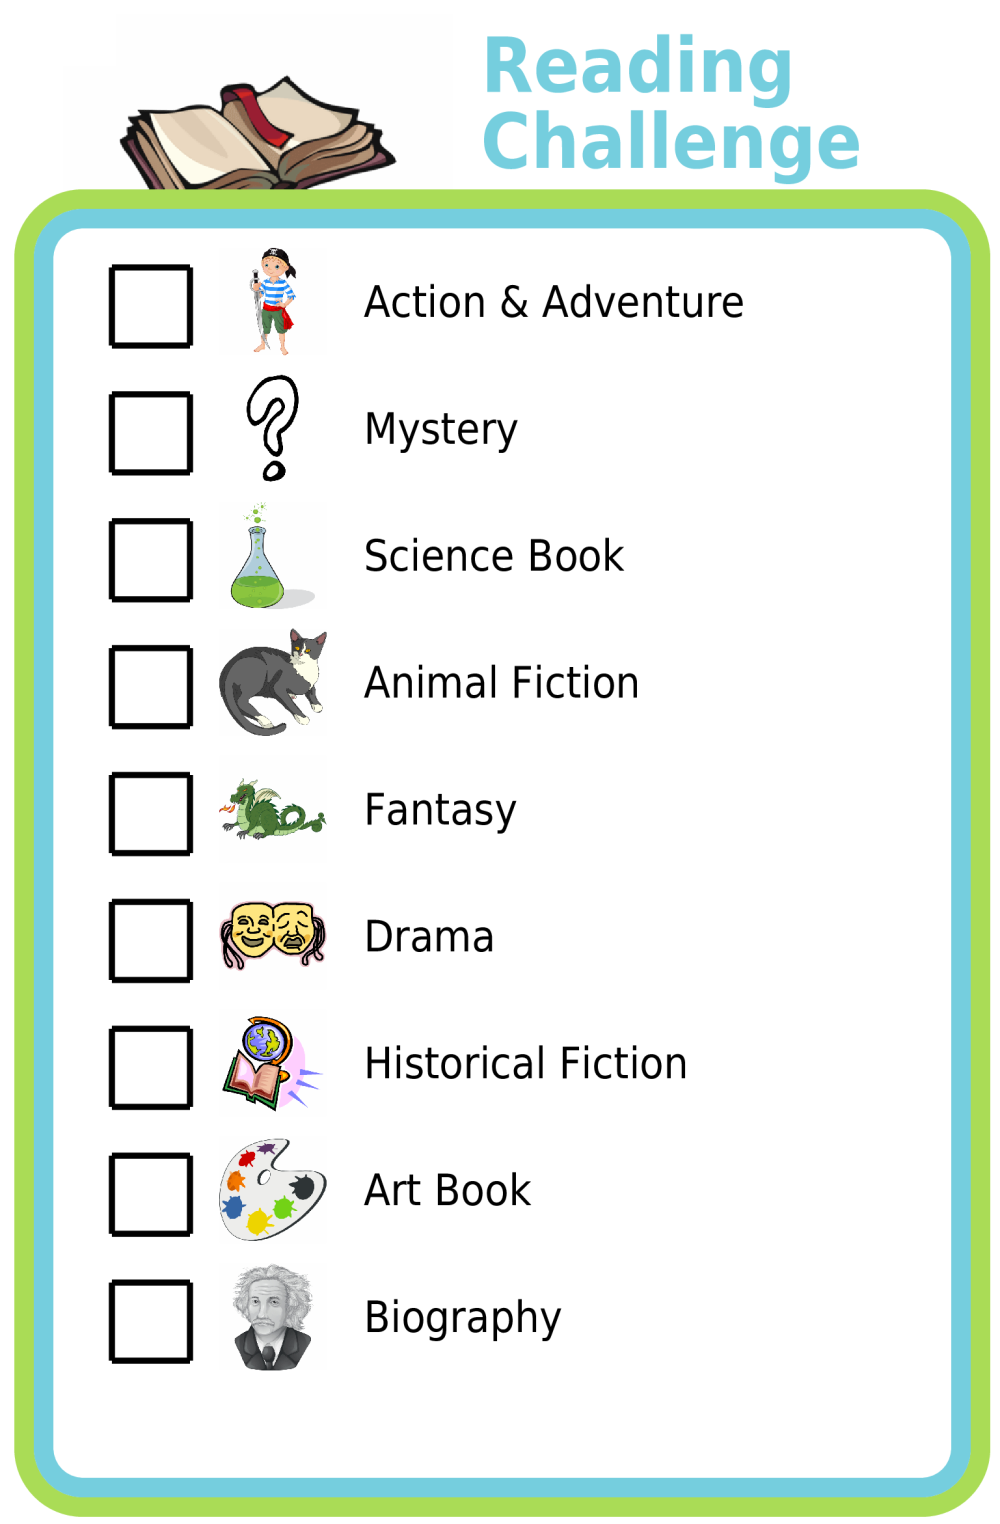 Picture checklist of a summer reading challenging with reading suggestions by genre